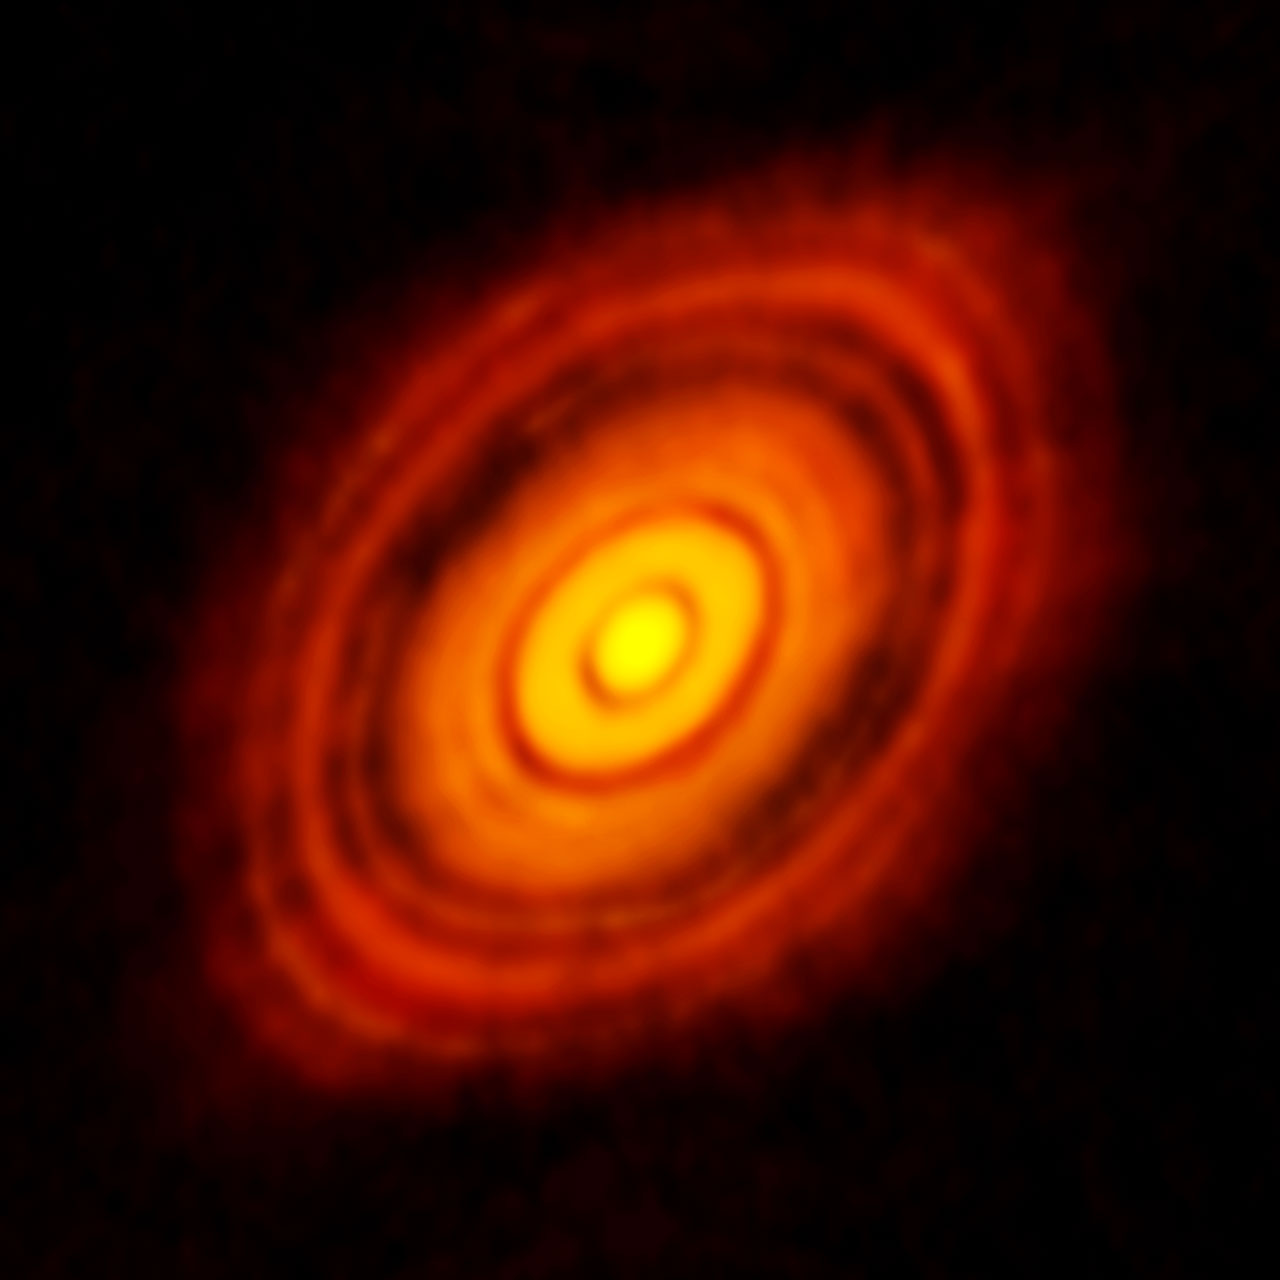 Image of debris disk surrounding the star HL Tauri, taken by the Atacama Large Millimeter/submillimeter Array (ALMA) in 2014. It is similar to the debris disk around the star AU Microscopii. Image Credit: ALMA/ESO/NAOJ/NRAO